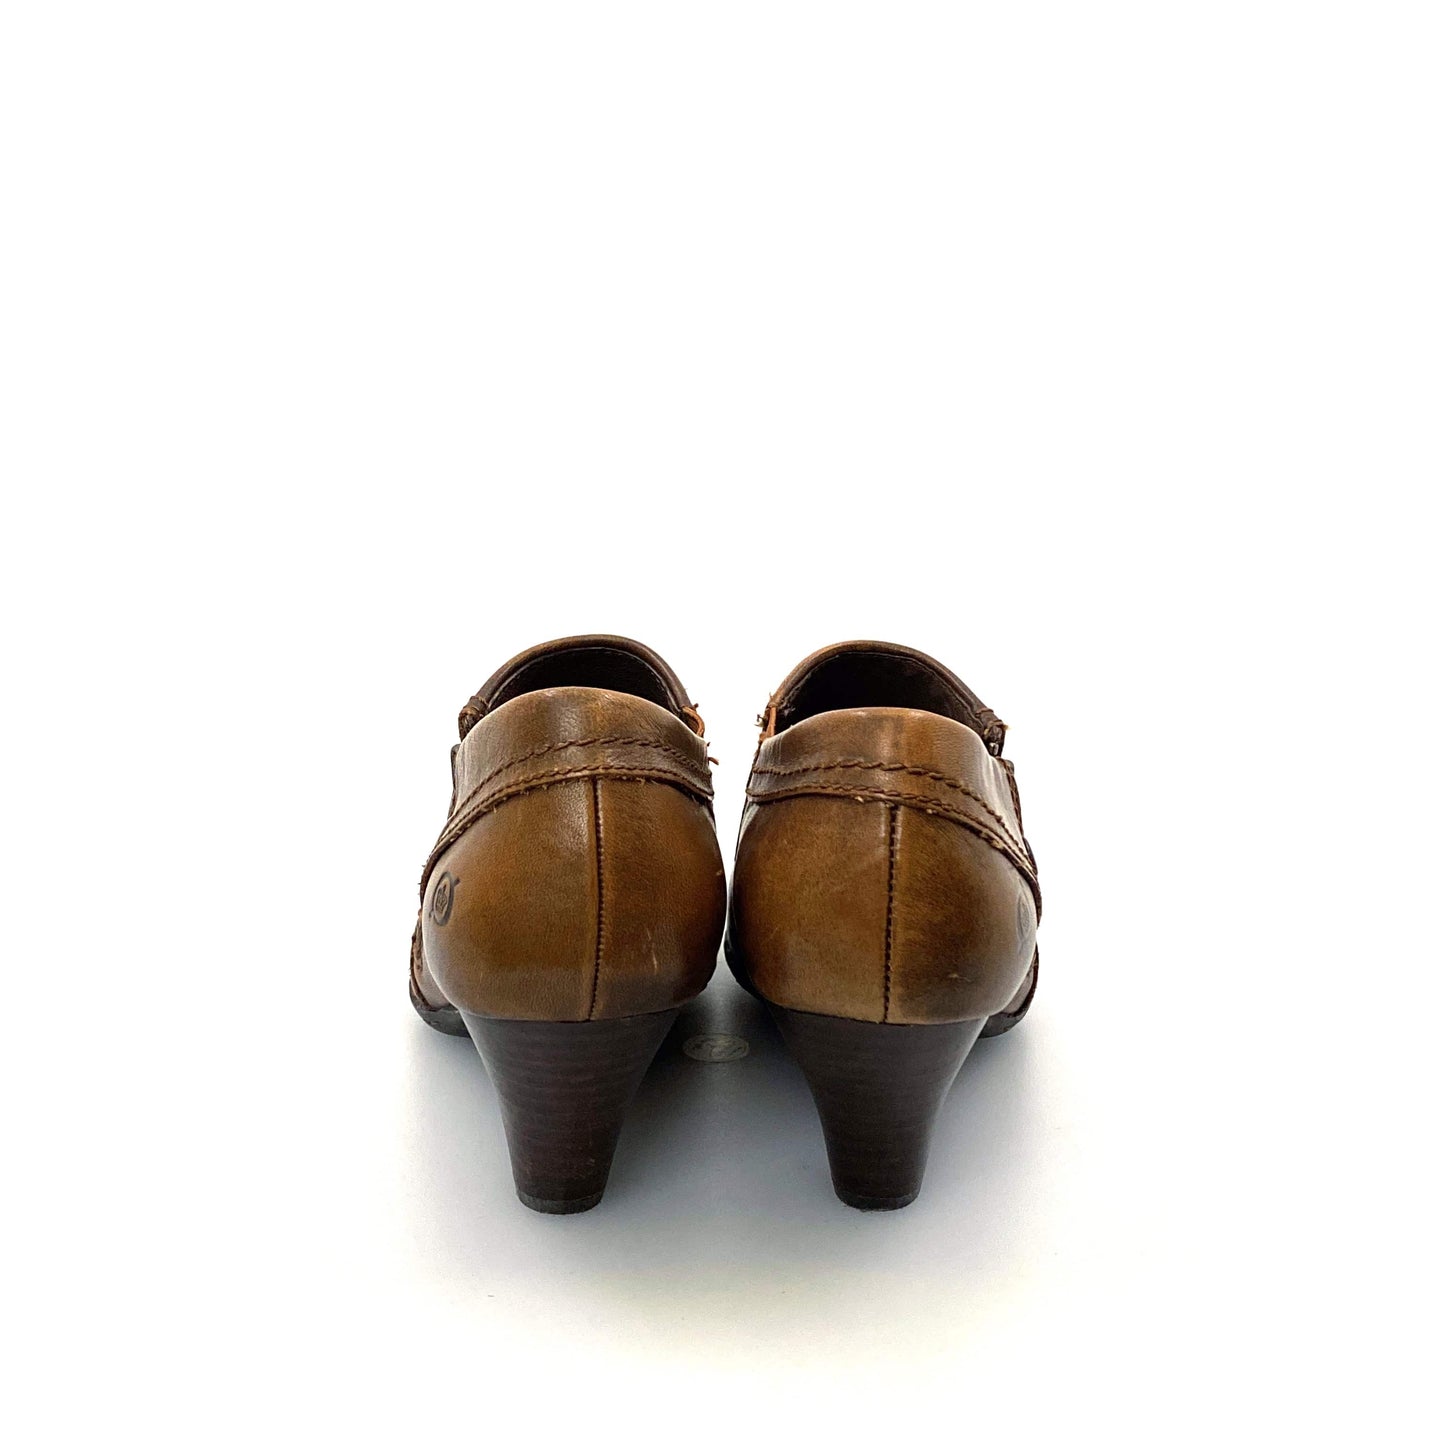 Born Womens "Tanya" Size 7.5M / 38.5 Marrone Brown Leather Ankle Booties